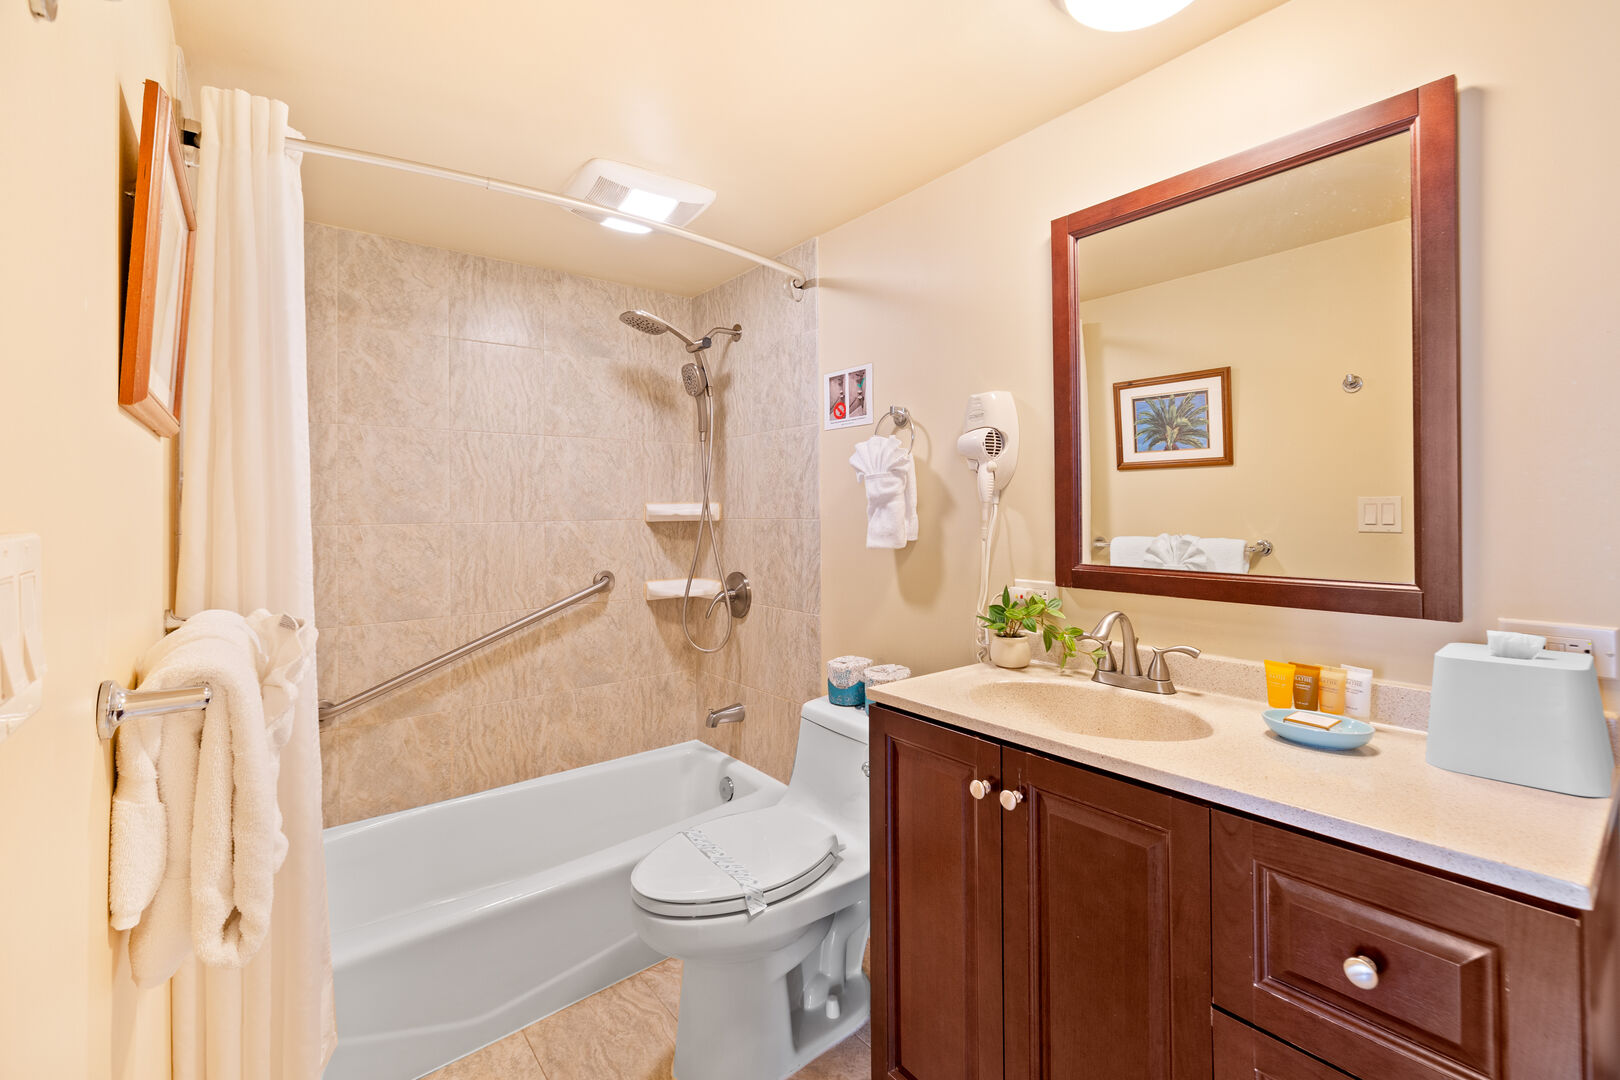 The bathroom has a vanity with a cabinet and a shower/tub combination!